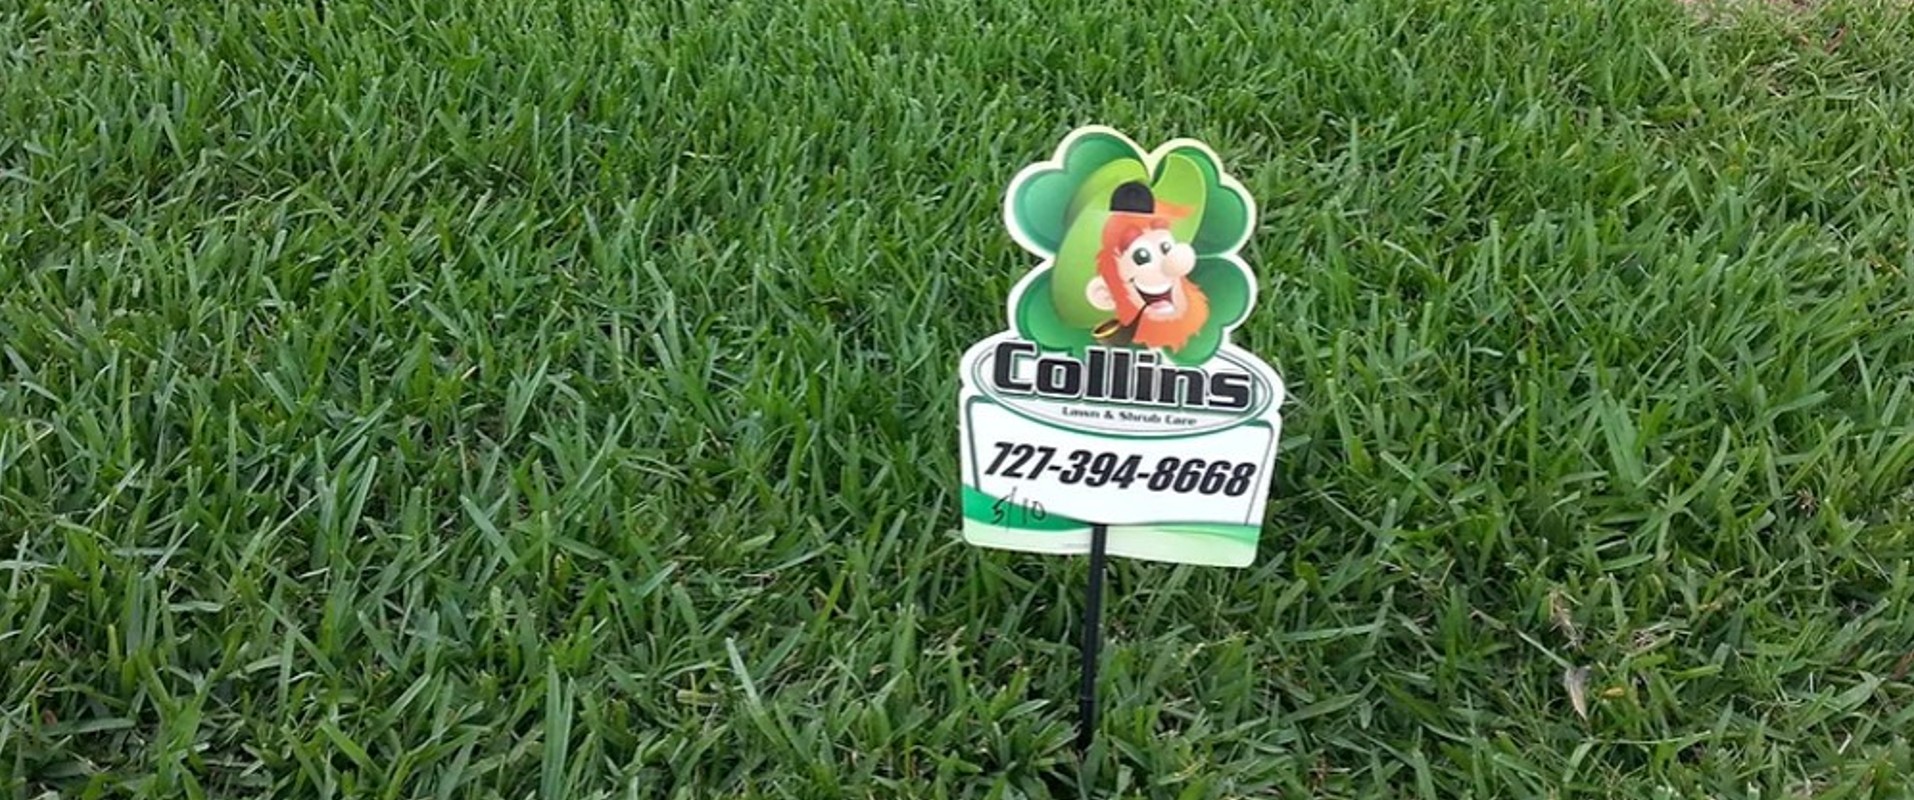 collins lawn care using fertilizers, weed control and protection from pest and diseases